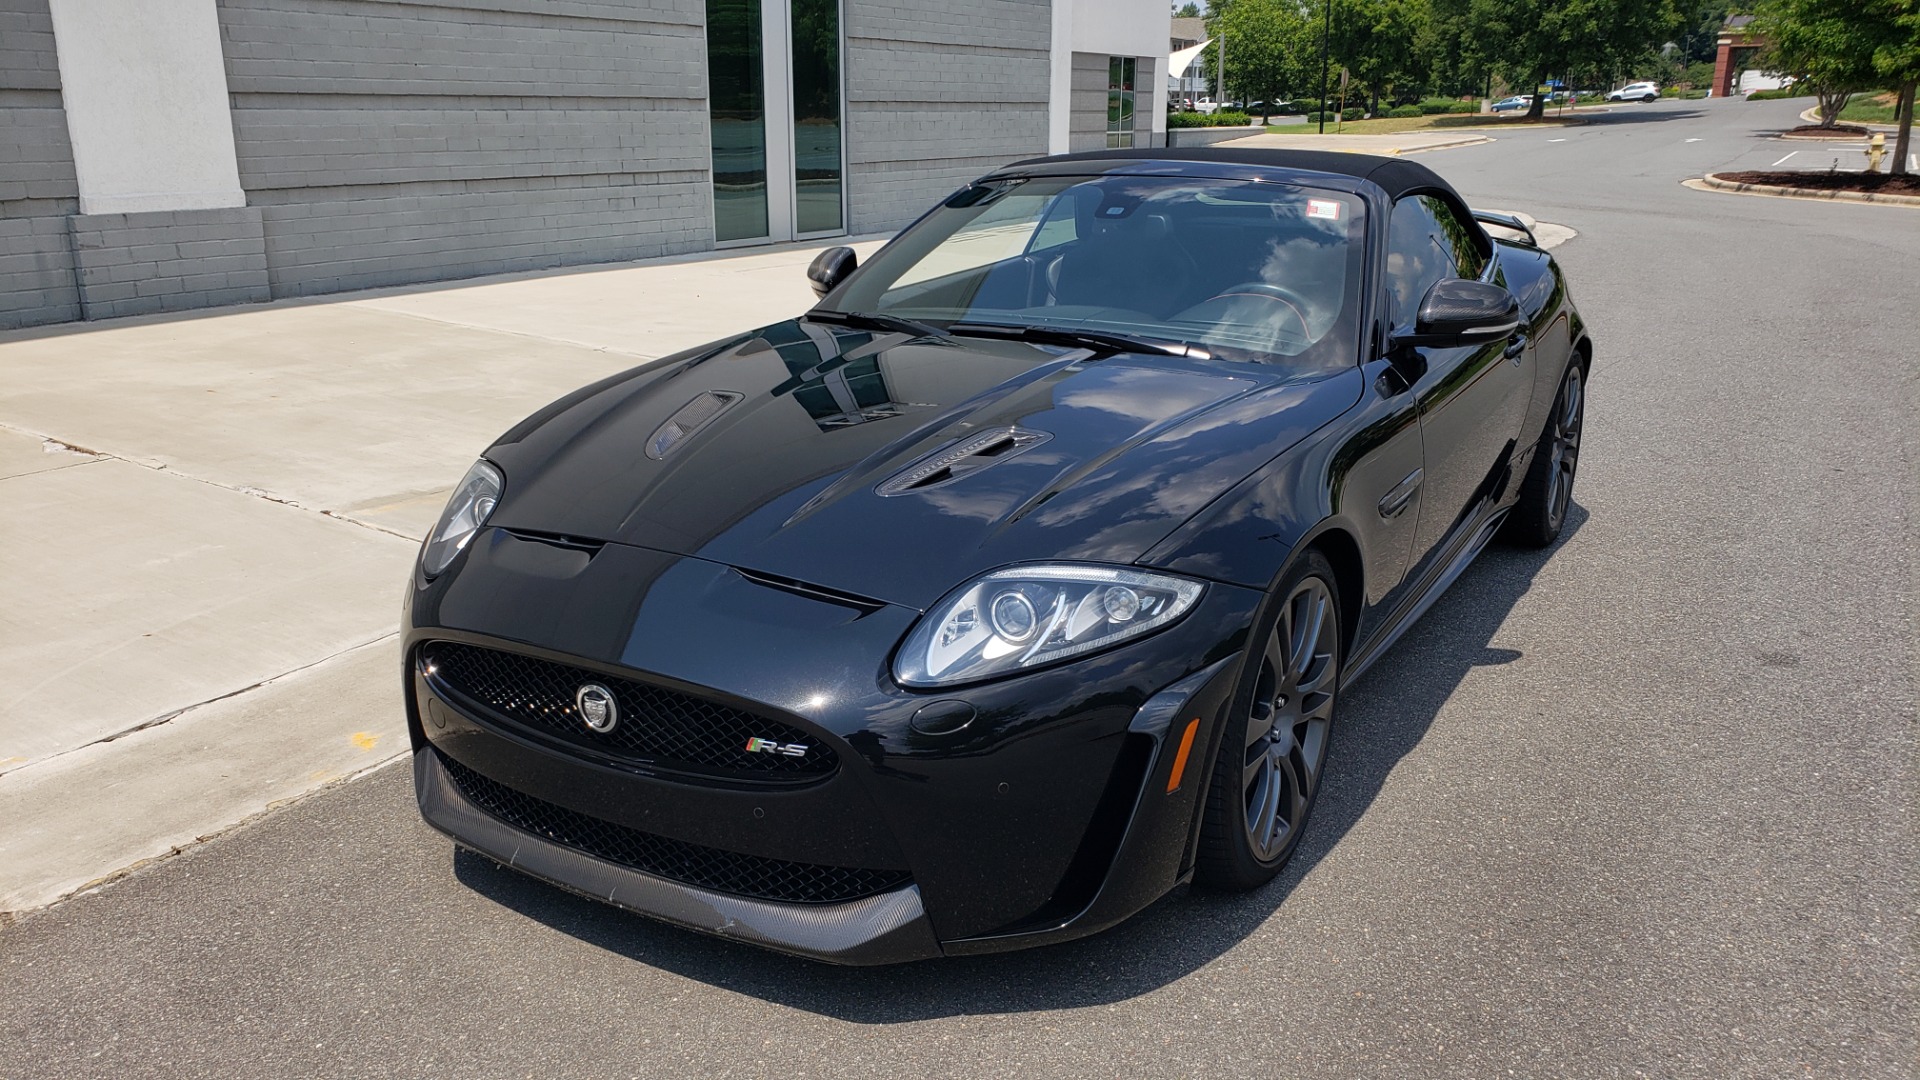 Used 2013 Jaguar XK R-S CONVERTIBLE / SC 5.0L V8 (550HP) / ZF 6-SPD AUTO / NAV / REARVIEW for sale Sold at Formula Imports in Charlotte NC 28227 4